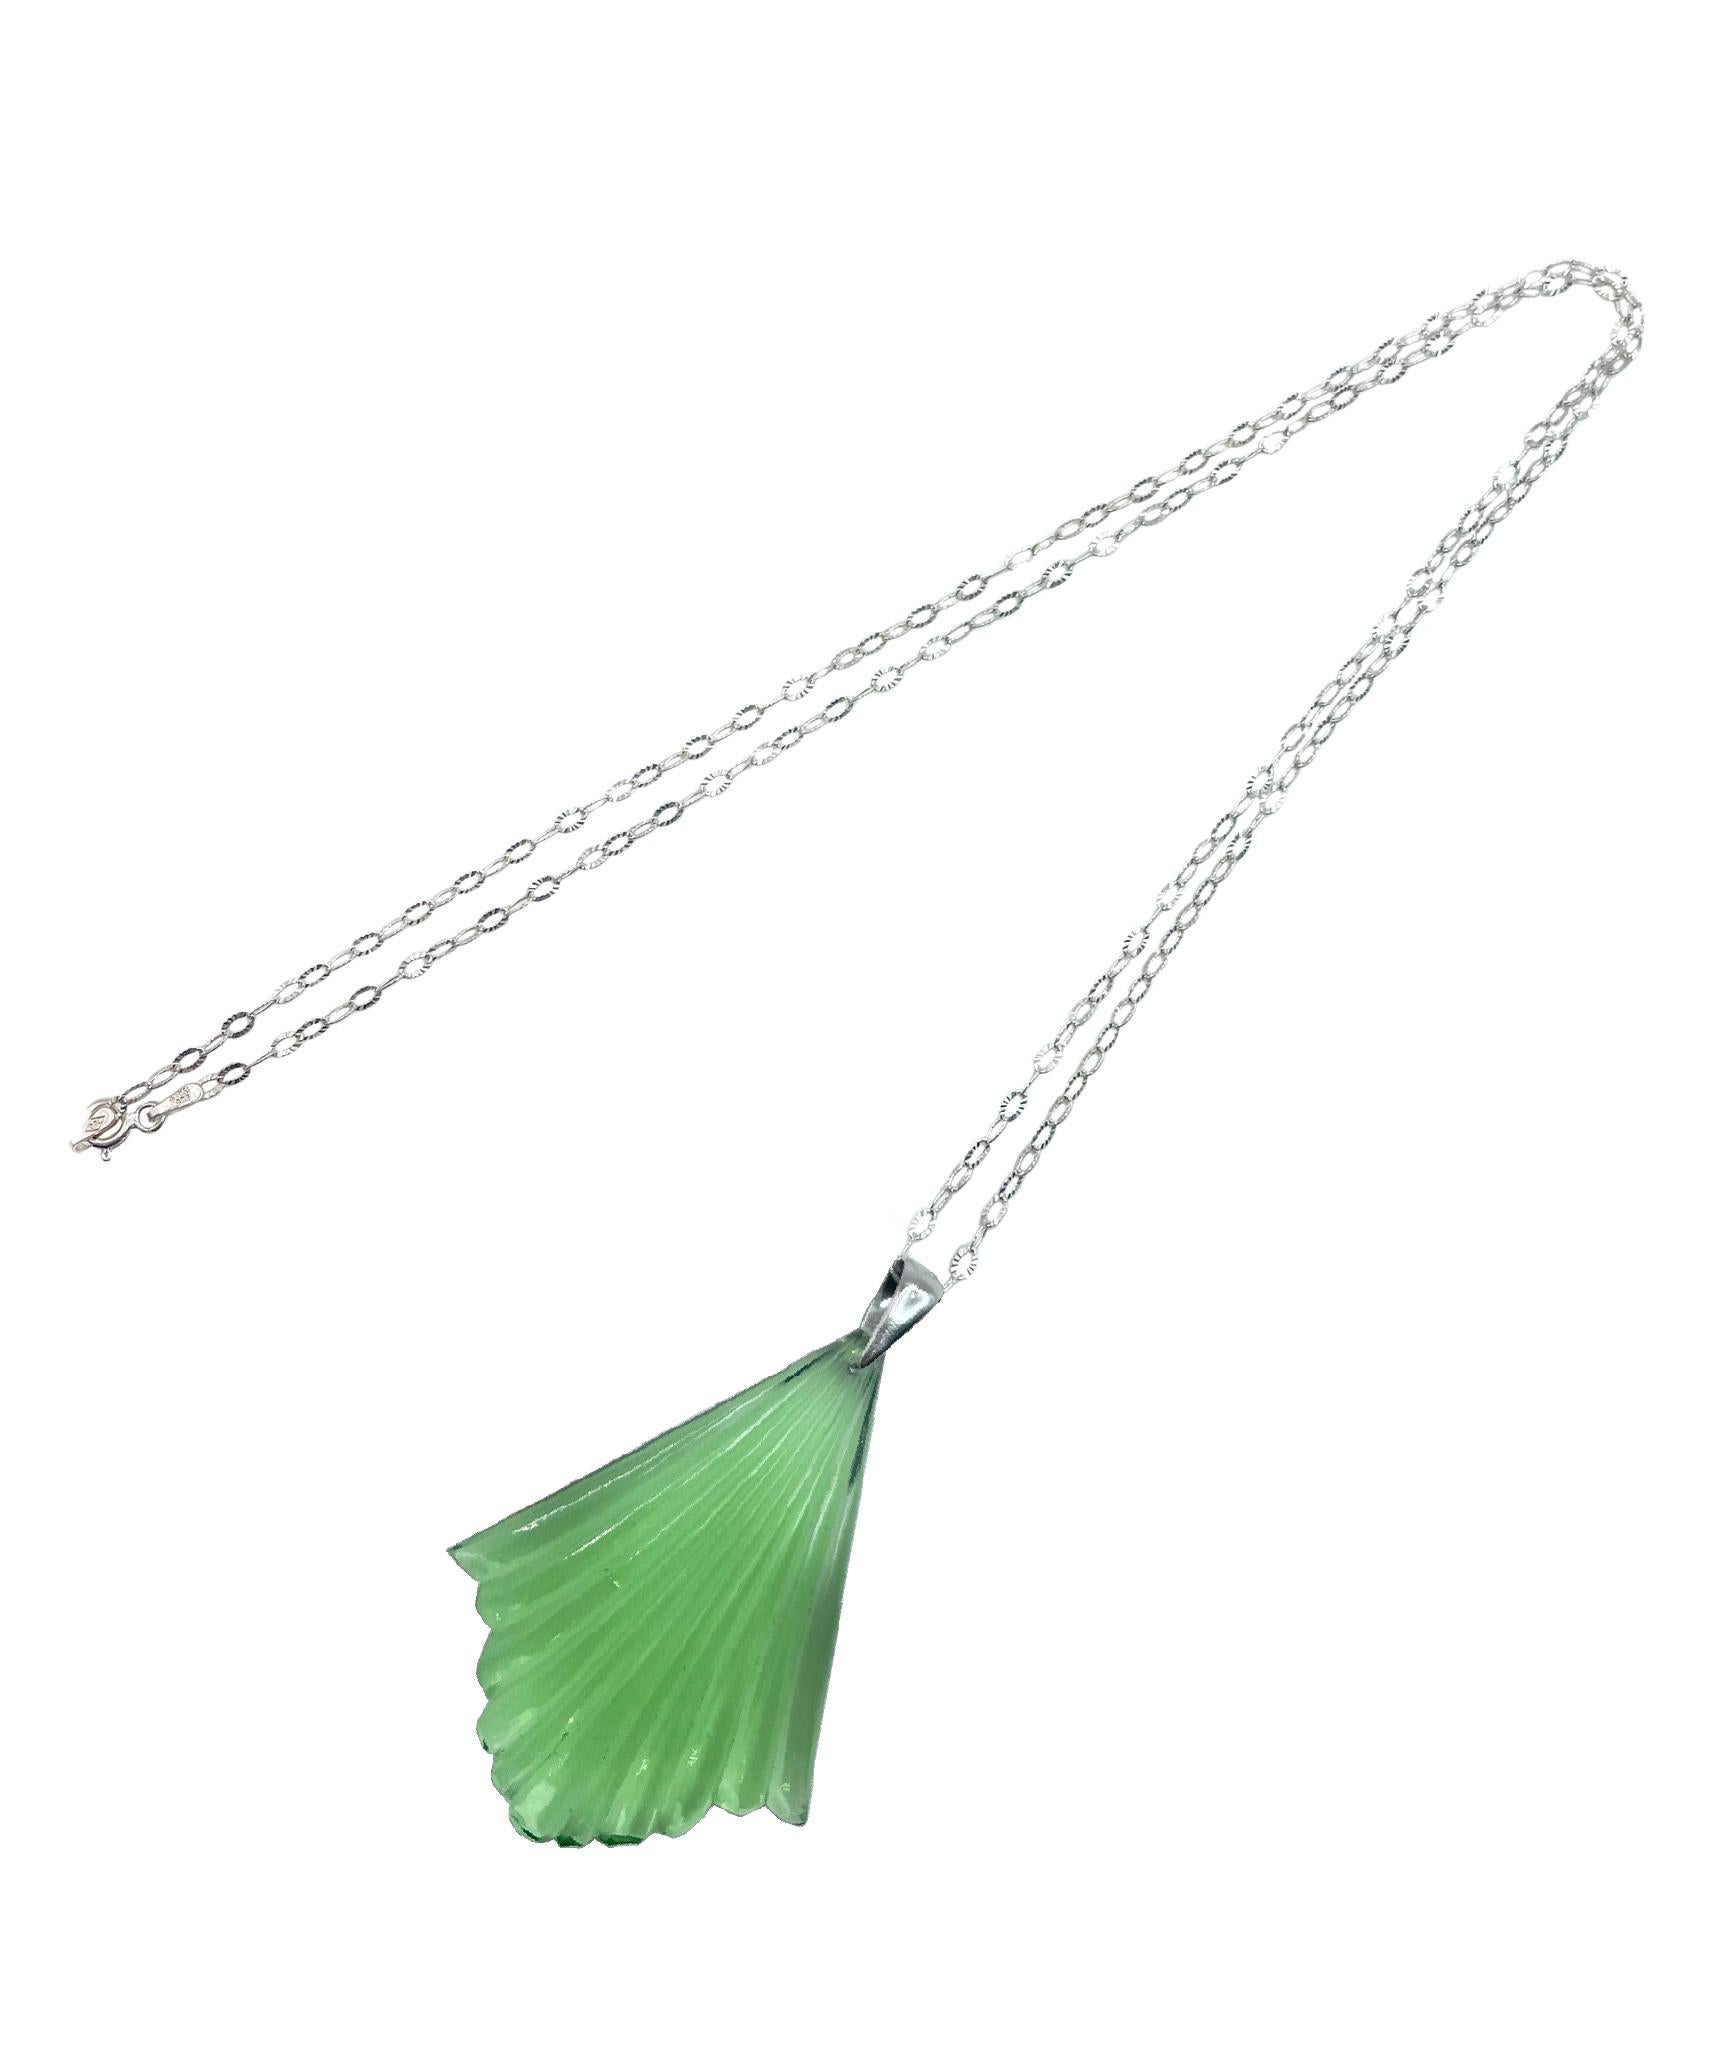 This Art Deco molded transparent green glass fan pendant is from 1930s Czech Republic. 

A tribute to the bygone era of the 30's, the Deco fan symbolized power amongst pharaohs and royalty. This classic fan pattern is found in Art Deco architecture,